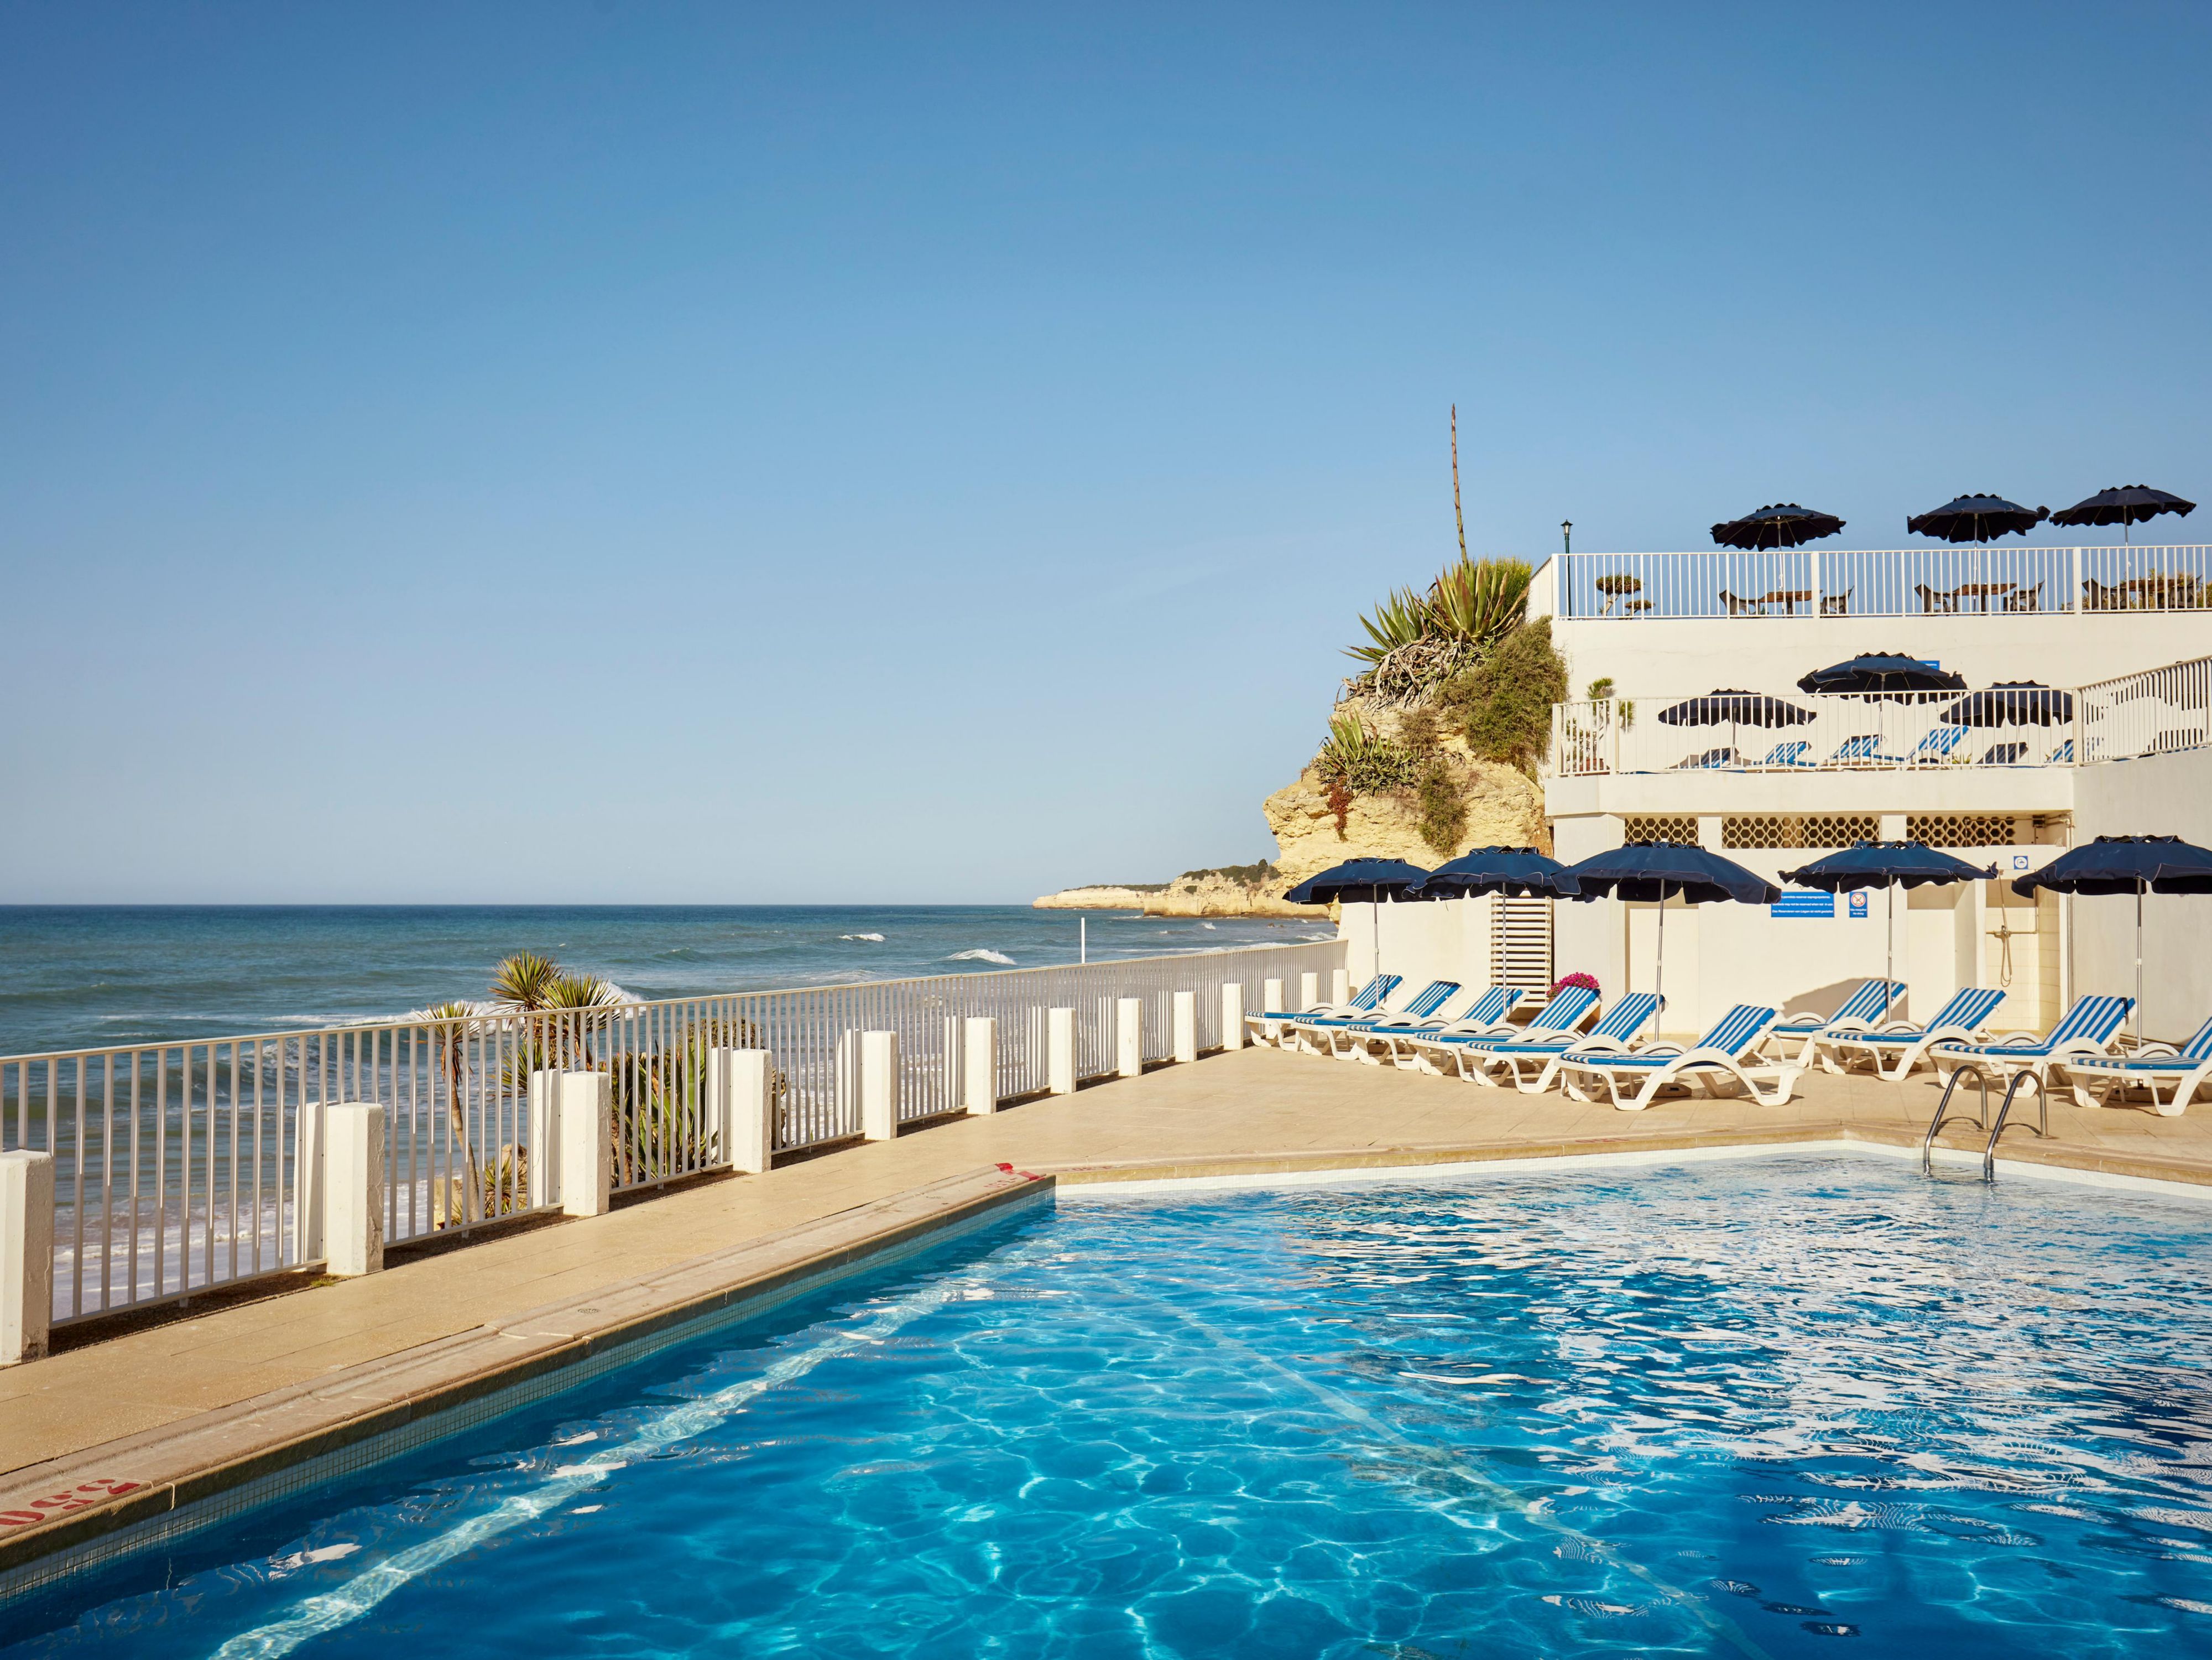 Not only are we right on the beach, we have a stunning out door pool - overlooking the beach